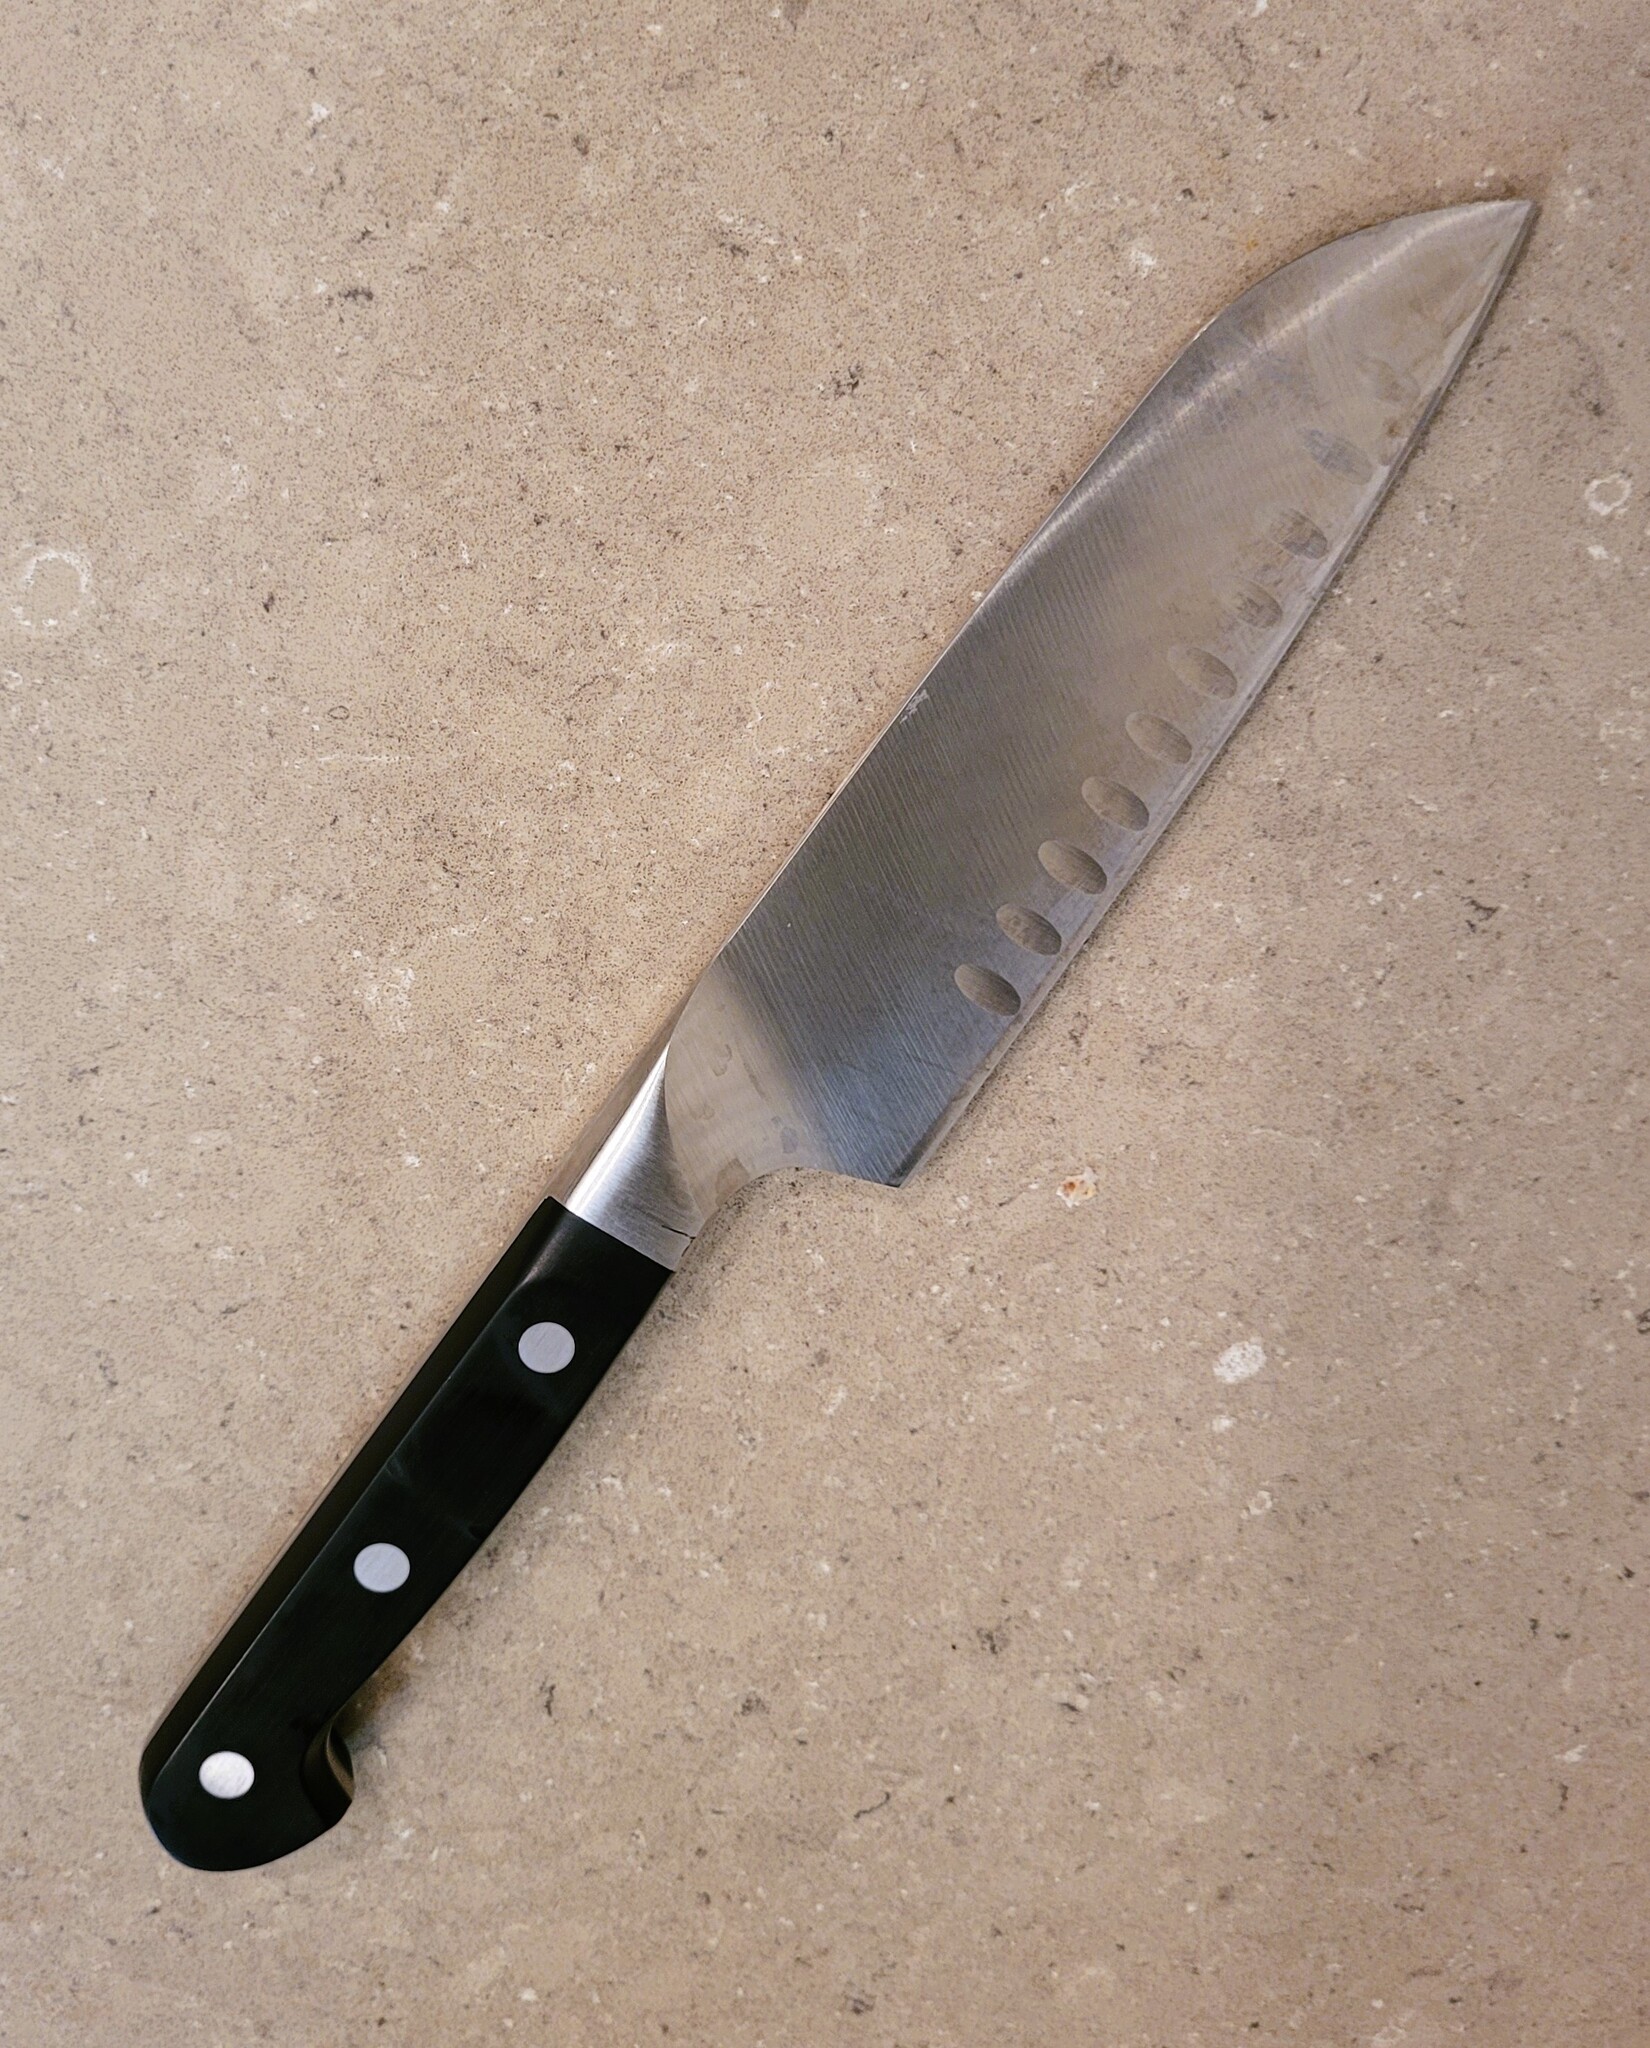 Professional Serrated Knife Sharpening - Blackstone's of Beacon Hill